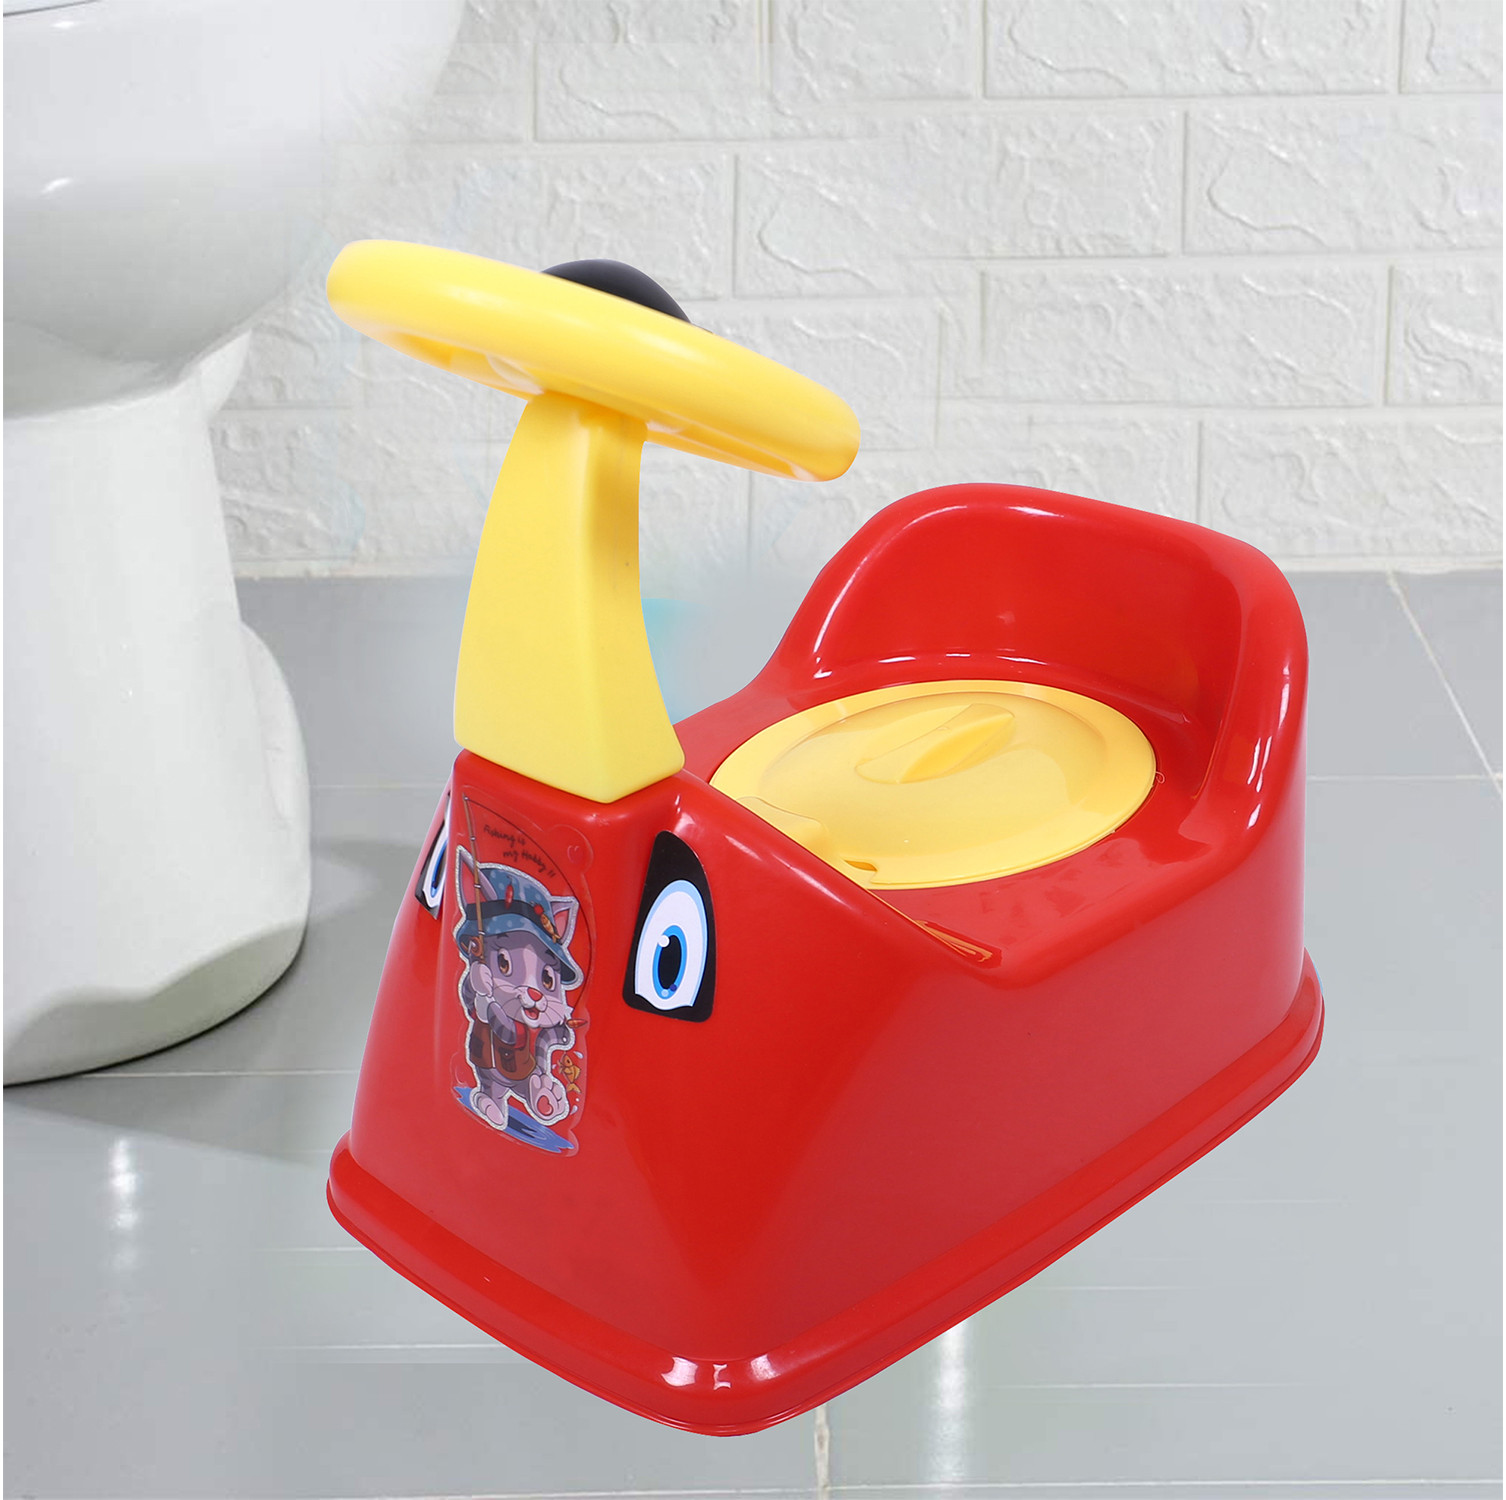 Kuber Industries Potty Toilet Trainer Seat | Plastic Potty Training Seat | Baby Potty Seat | Potty Seat For Child | Potty Training Seat for Kids | Steering Design | Red